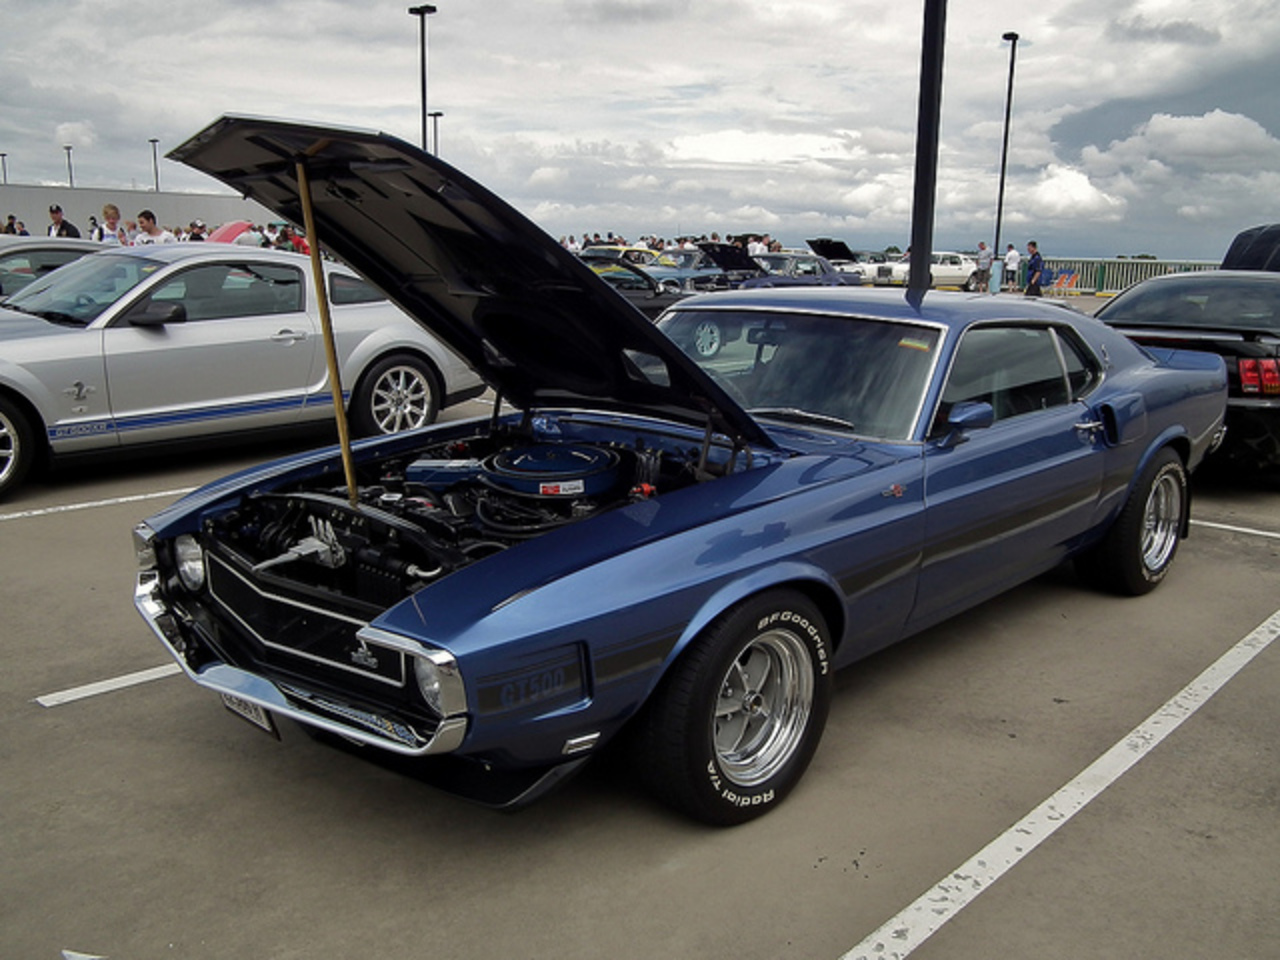 Ford Mustang Shelby GT500 coupé 1970 / Flickr - Partage de photos!